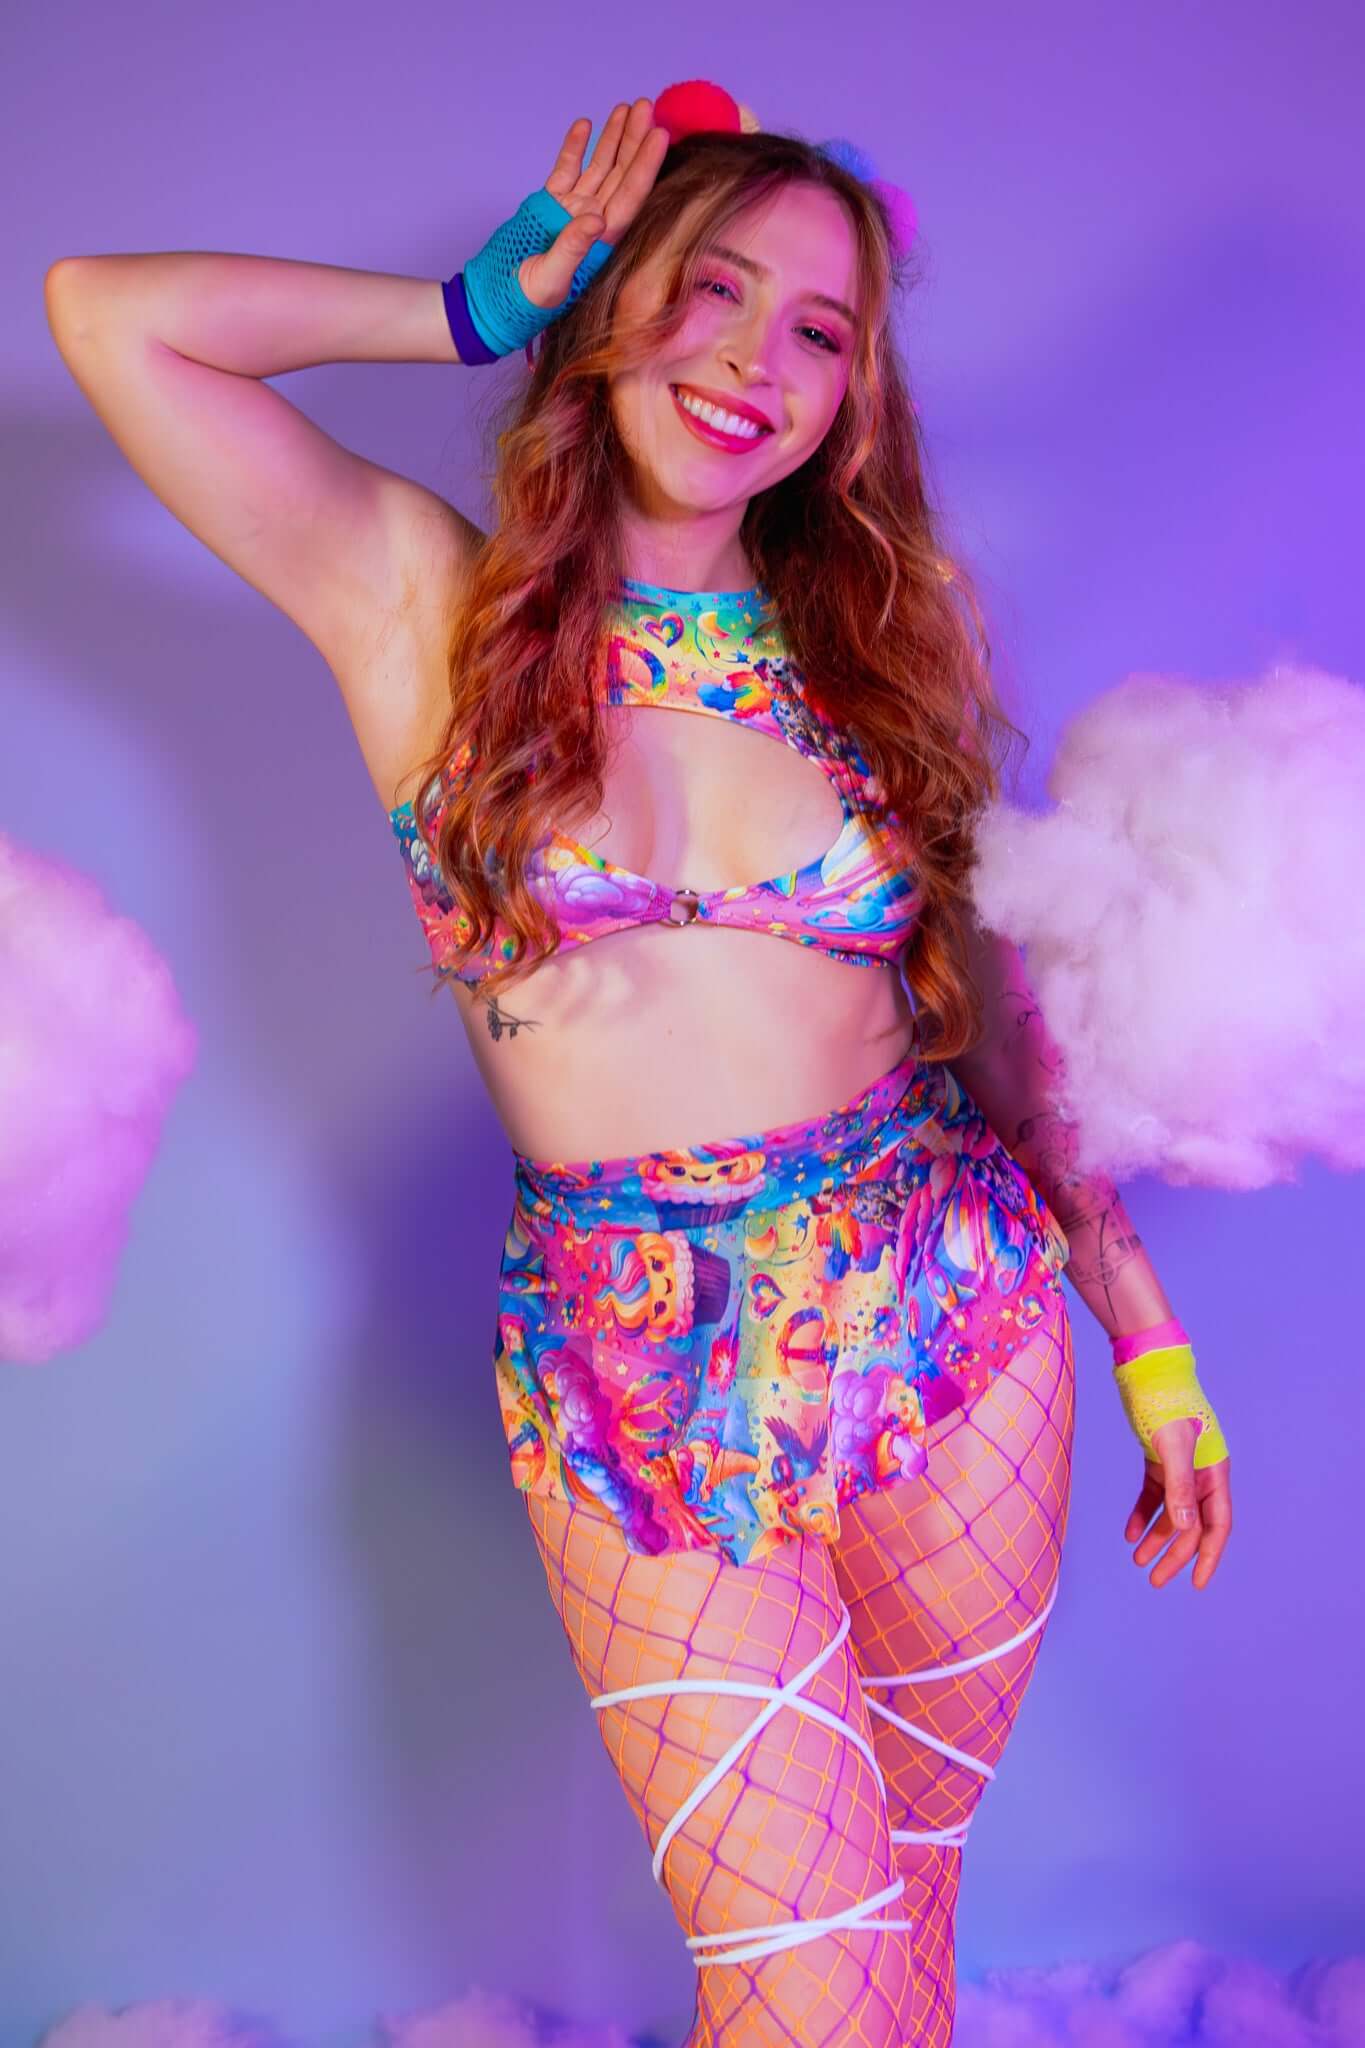 A girl wearing a rainbow crop top with whimsical characters on it and a matching mesh skirt.